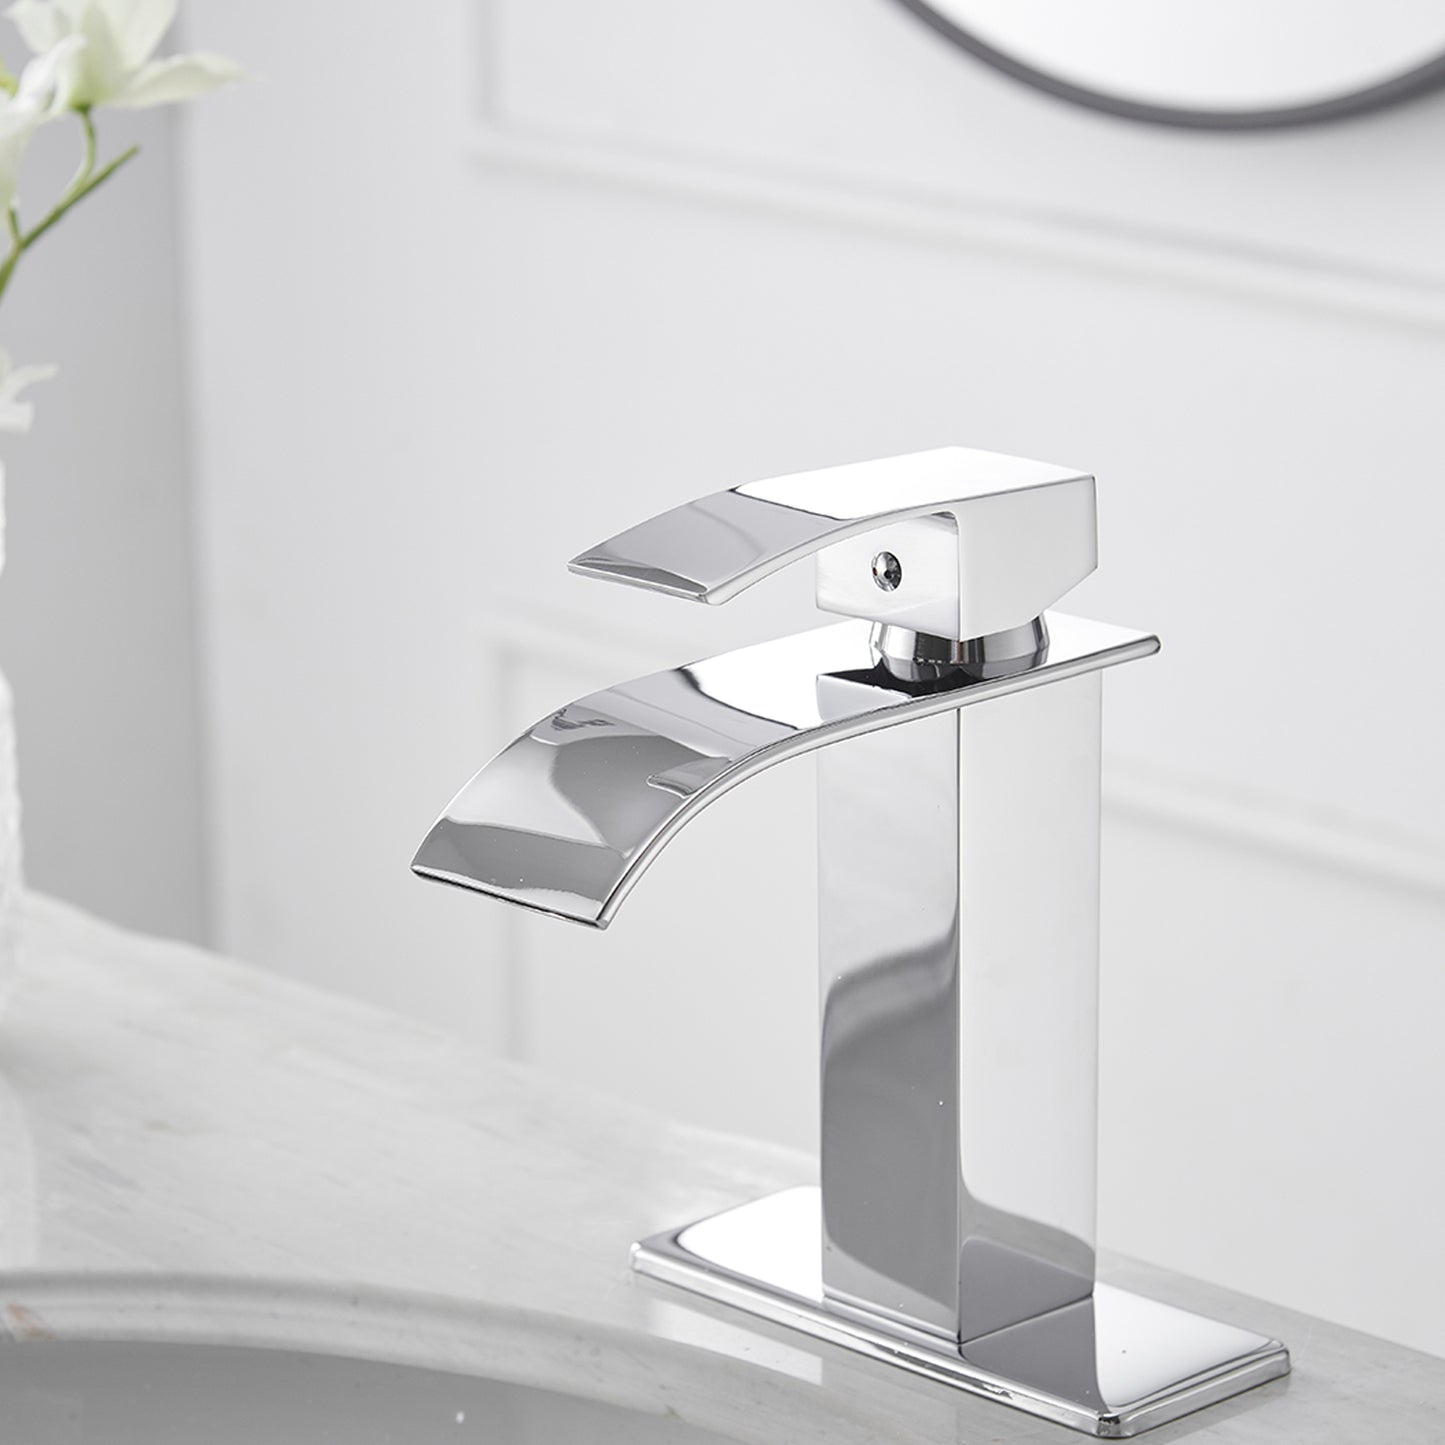 Waterfall Single Hole Single-Handle Low-Arc Bathroom Faucet With Pop-up Drain Assembly in Polished Chrome